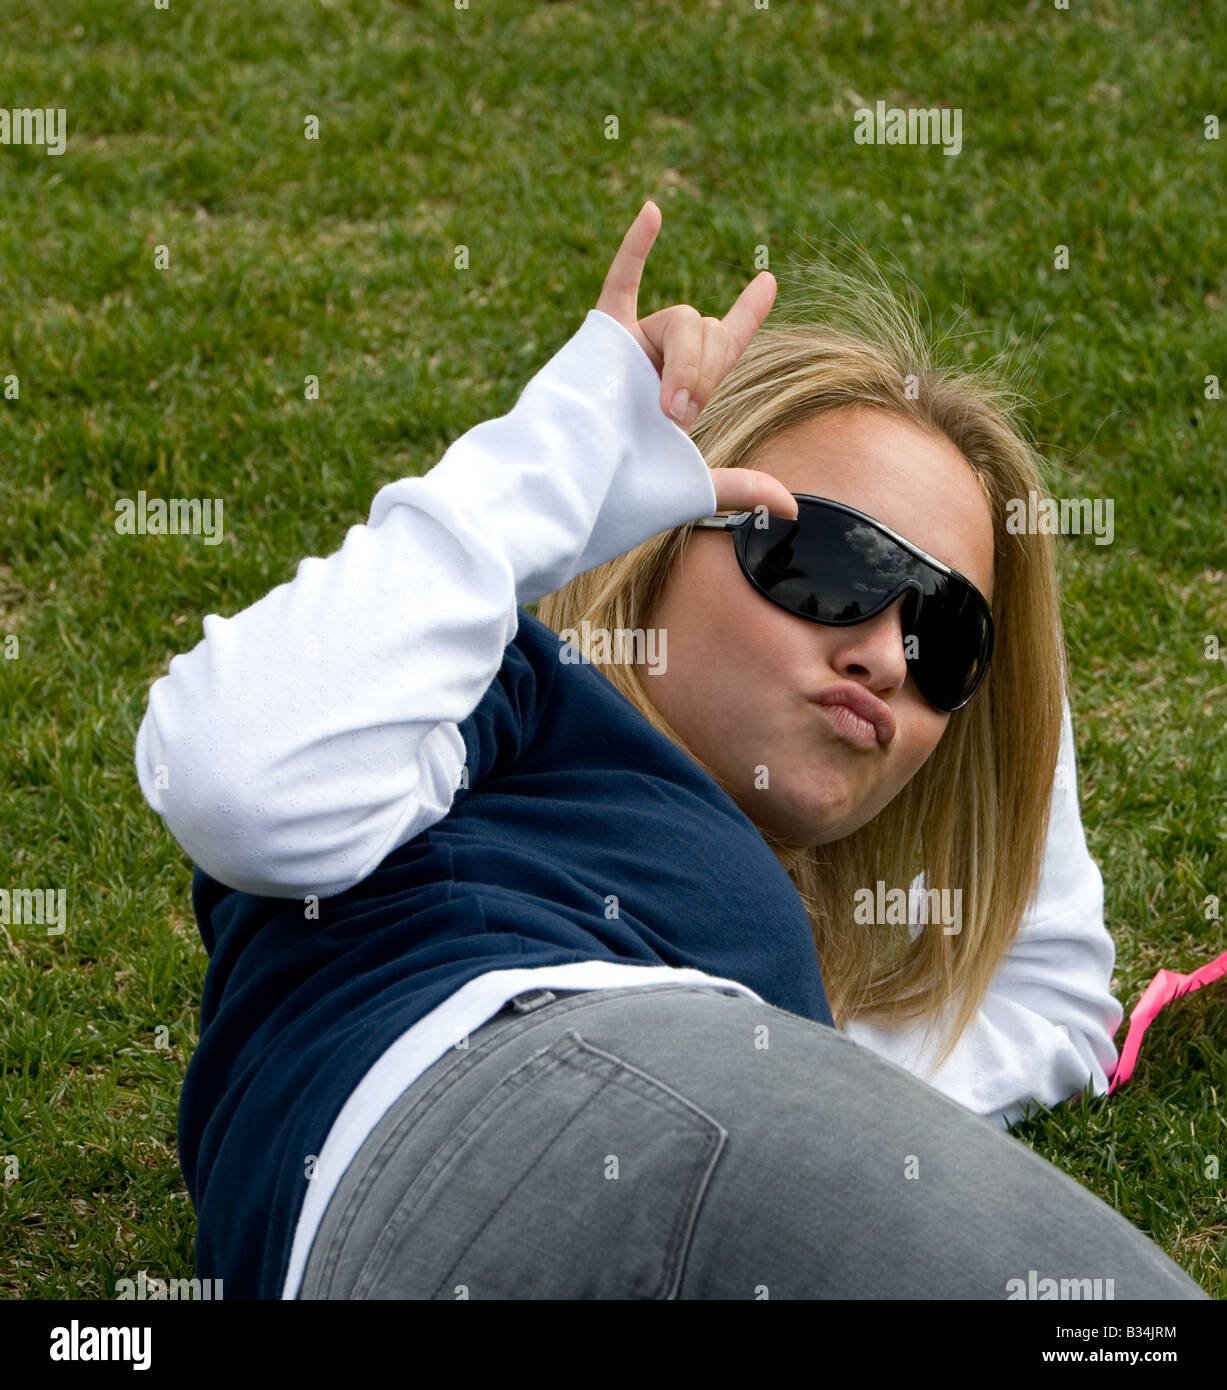 Hayden Panettiere from the TV show Heroes at the Big Blue March, Anchorage, Alaska Stock Photo